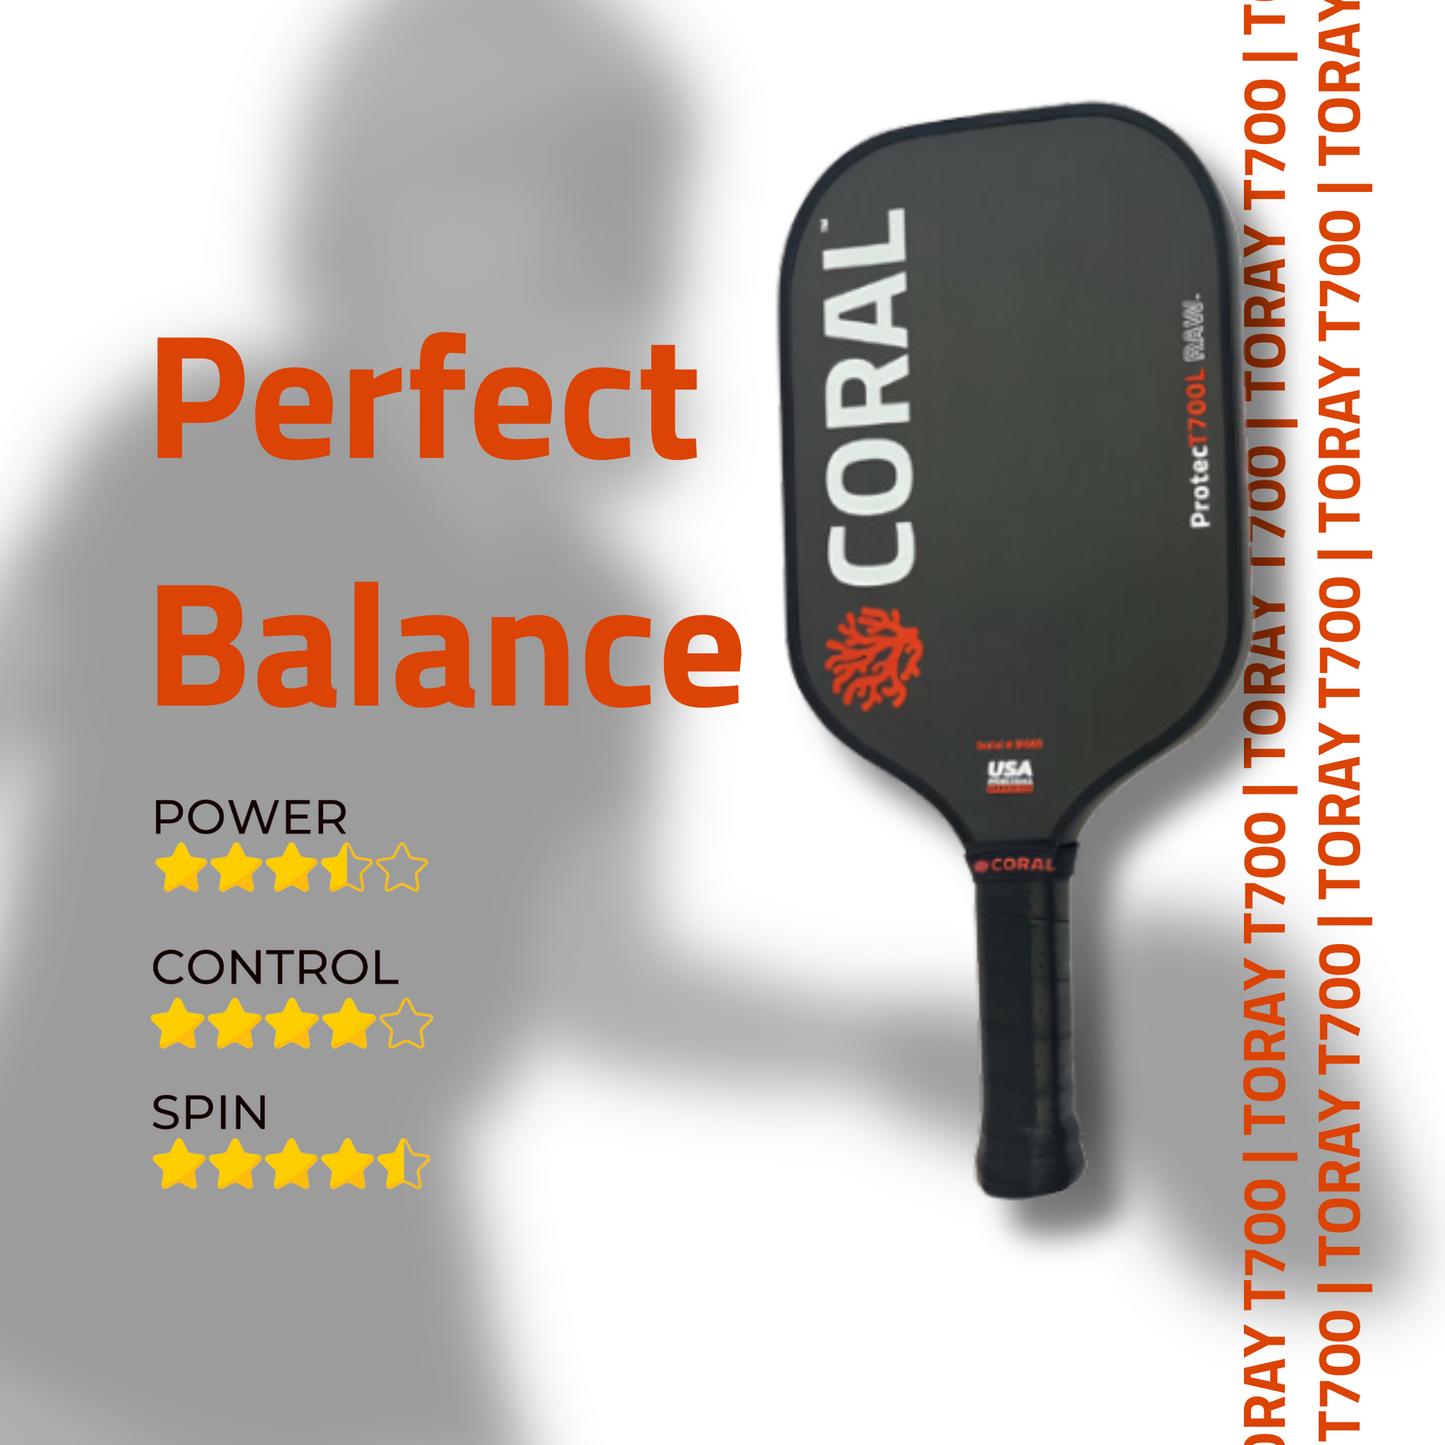 CORAL ProtecT700L RAW Carbon Fiber Pickleball Paddle with Free Protective Neoprene Cover